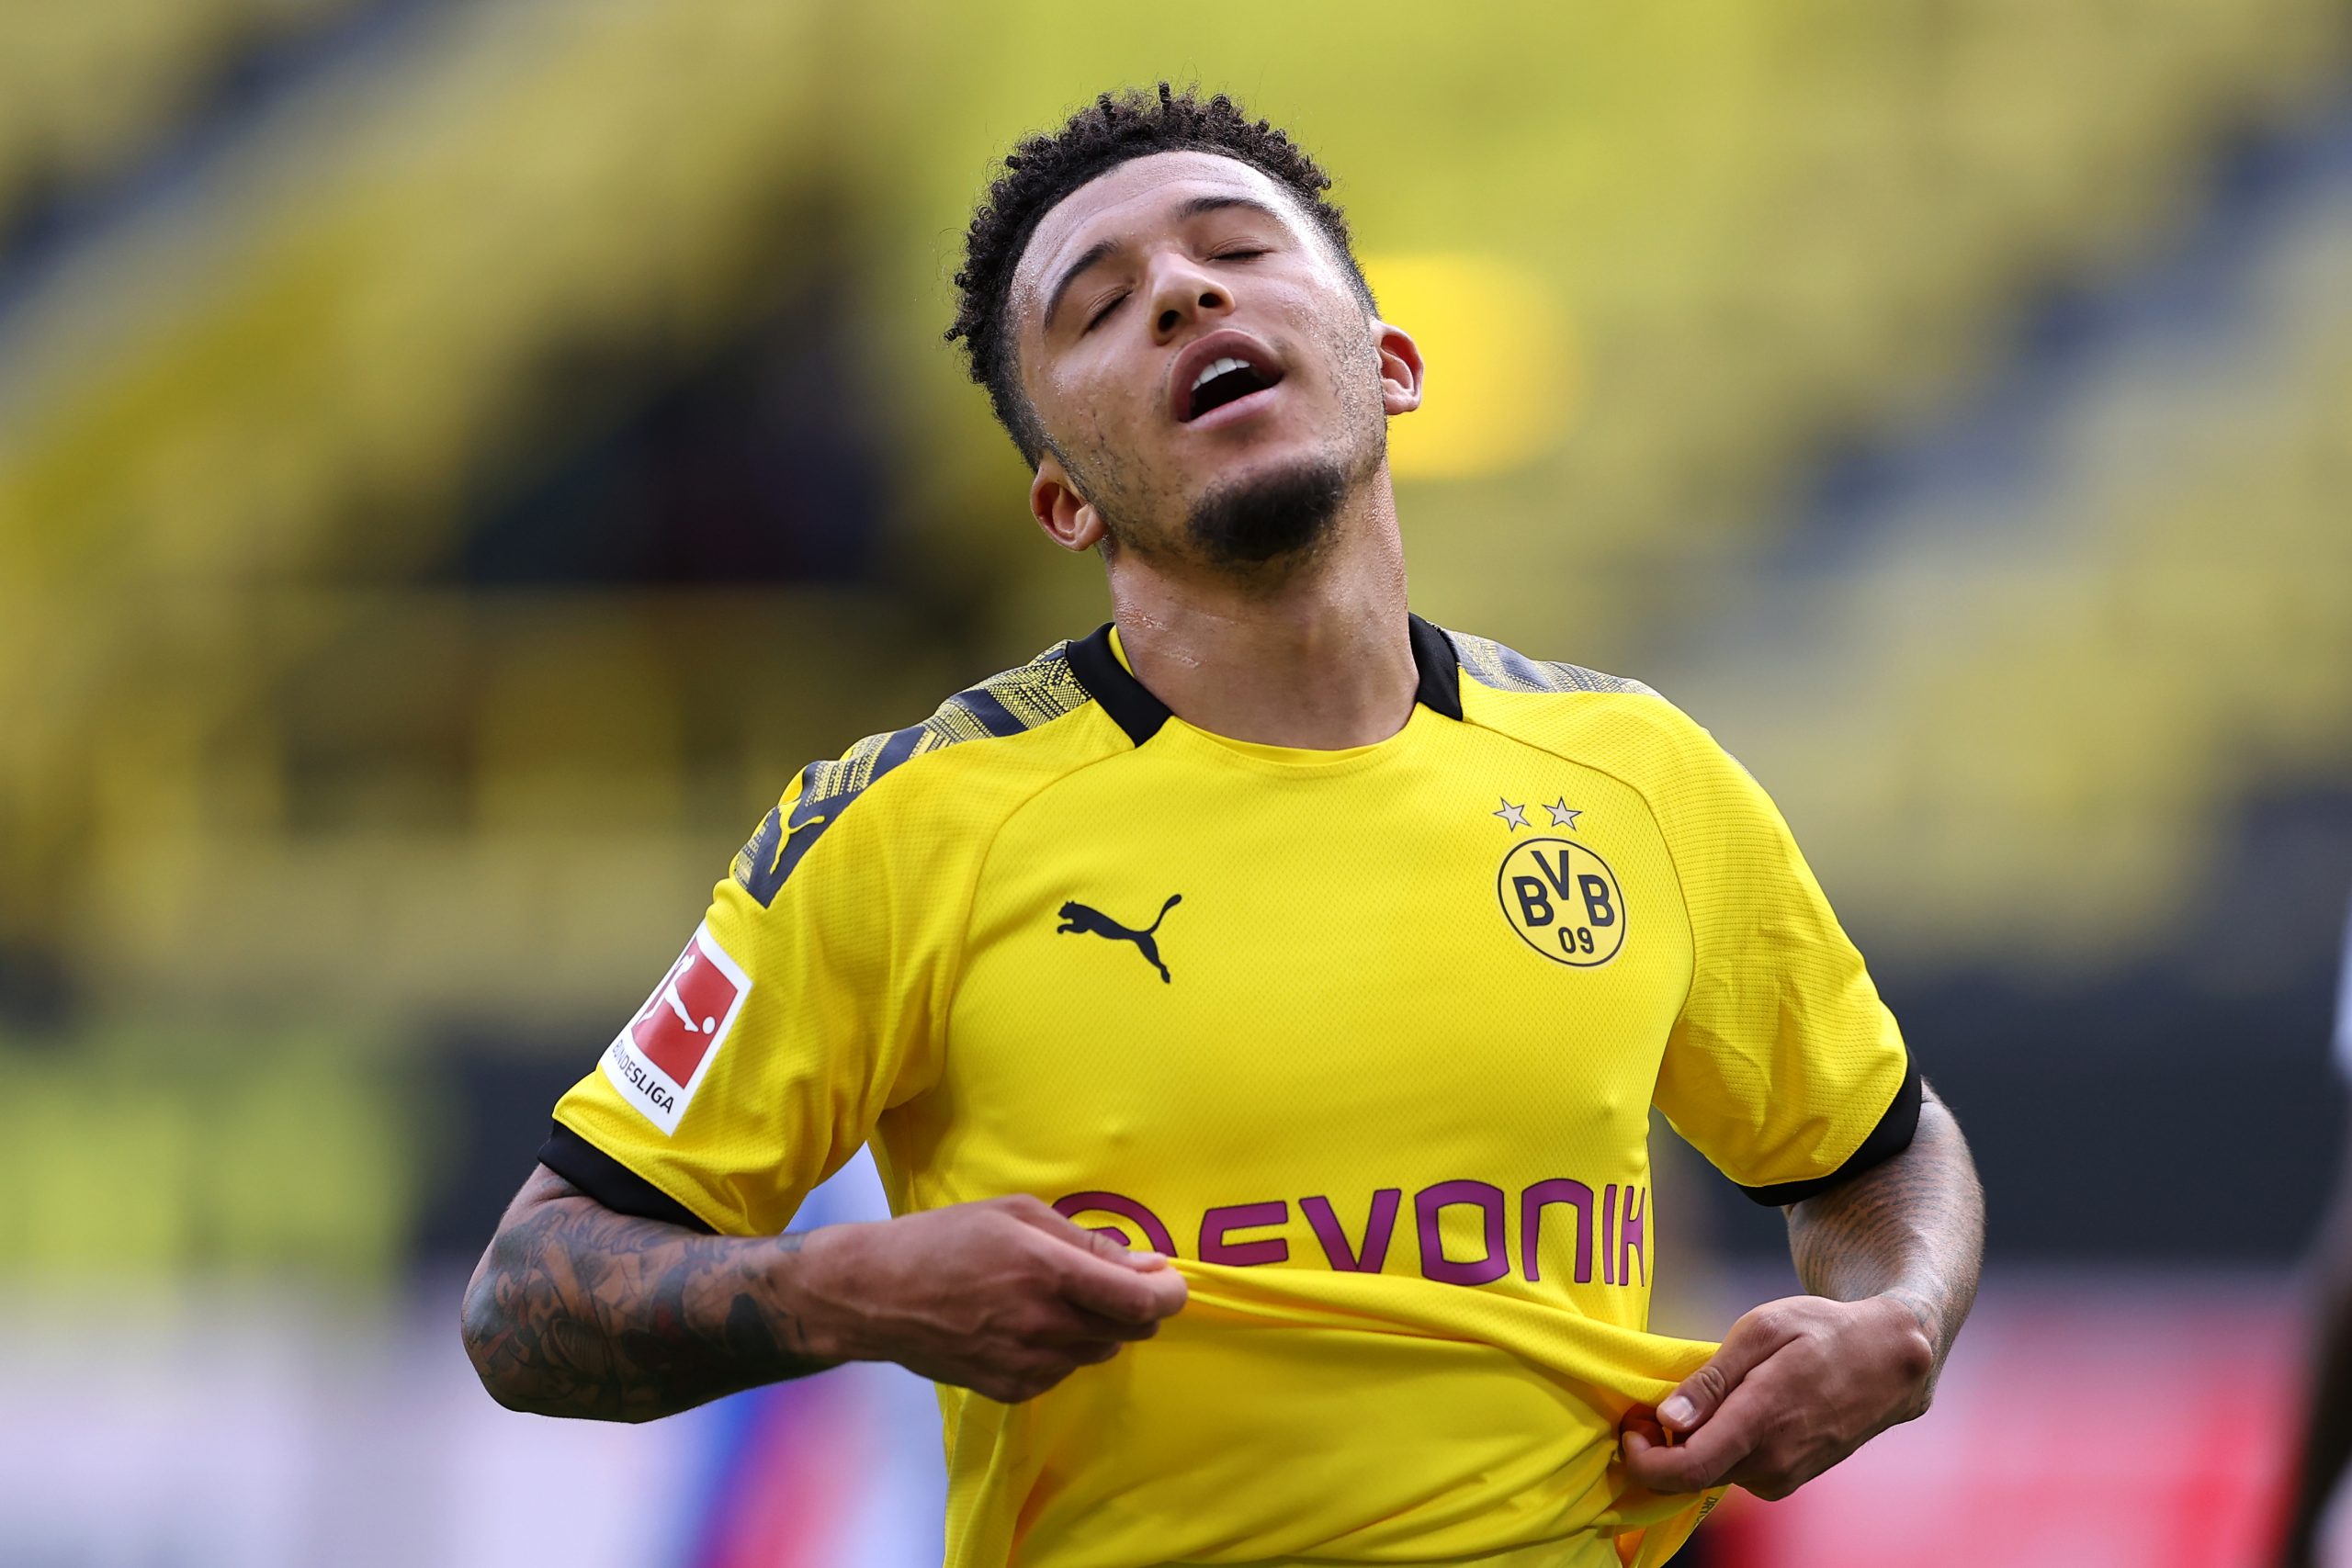 Chelsea to rival Manchester United for Jadon Sancho who is seen in the photo